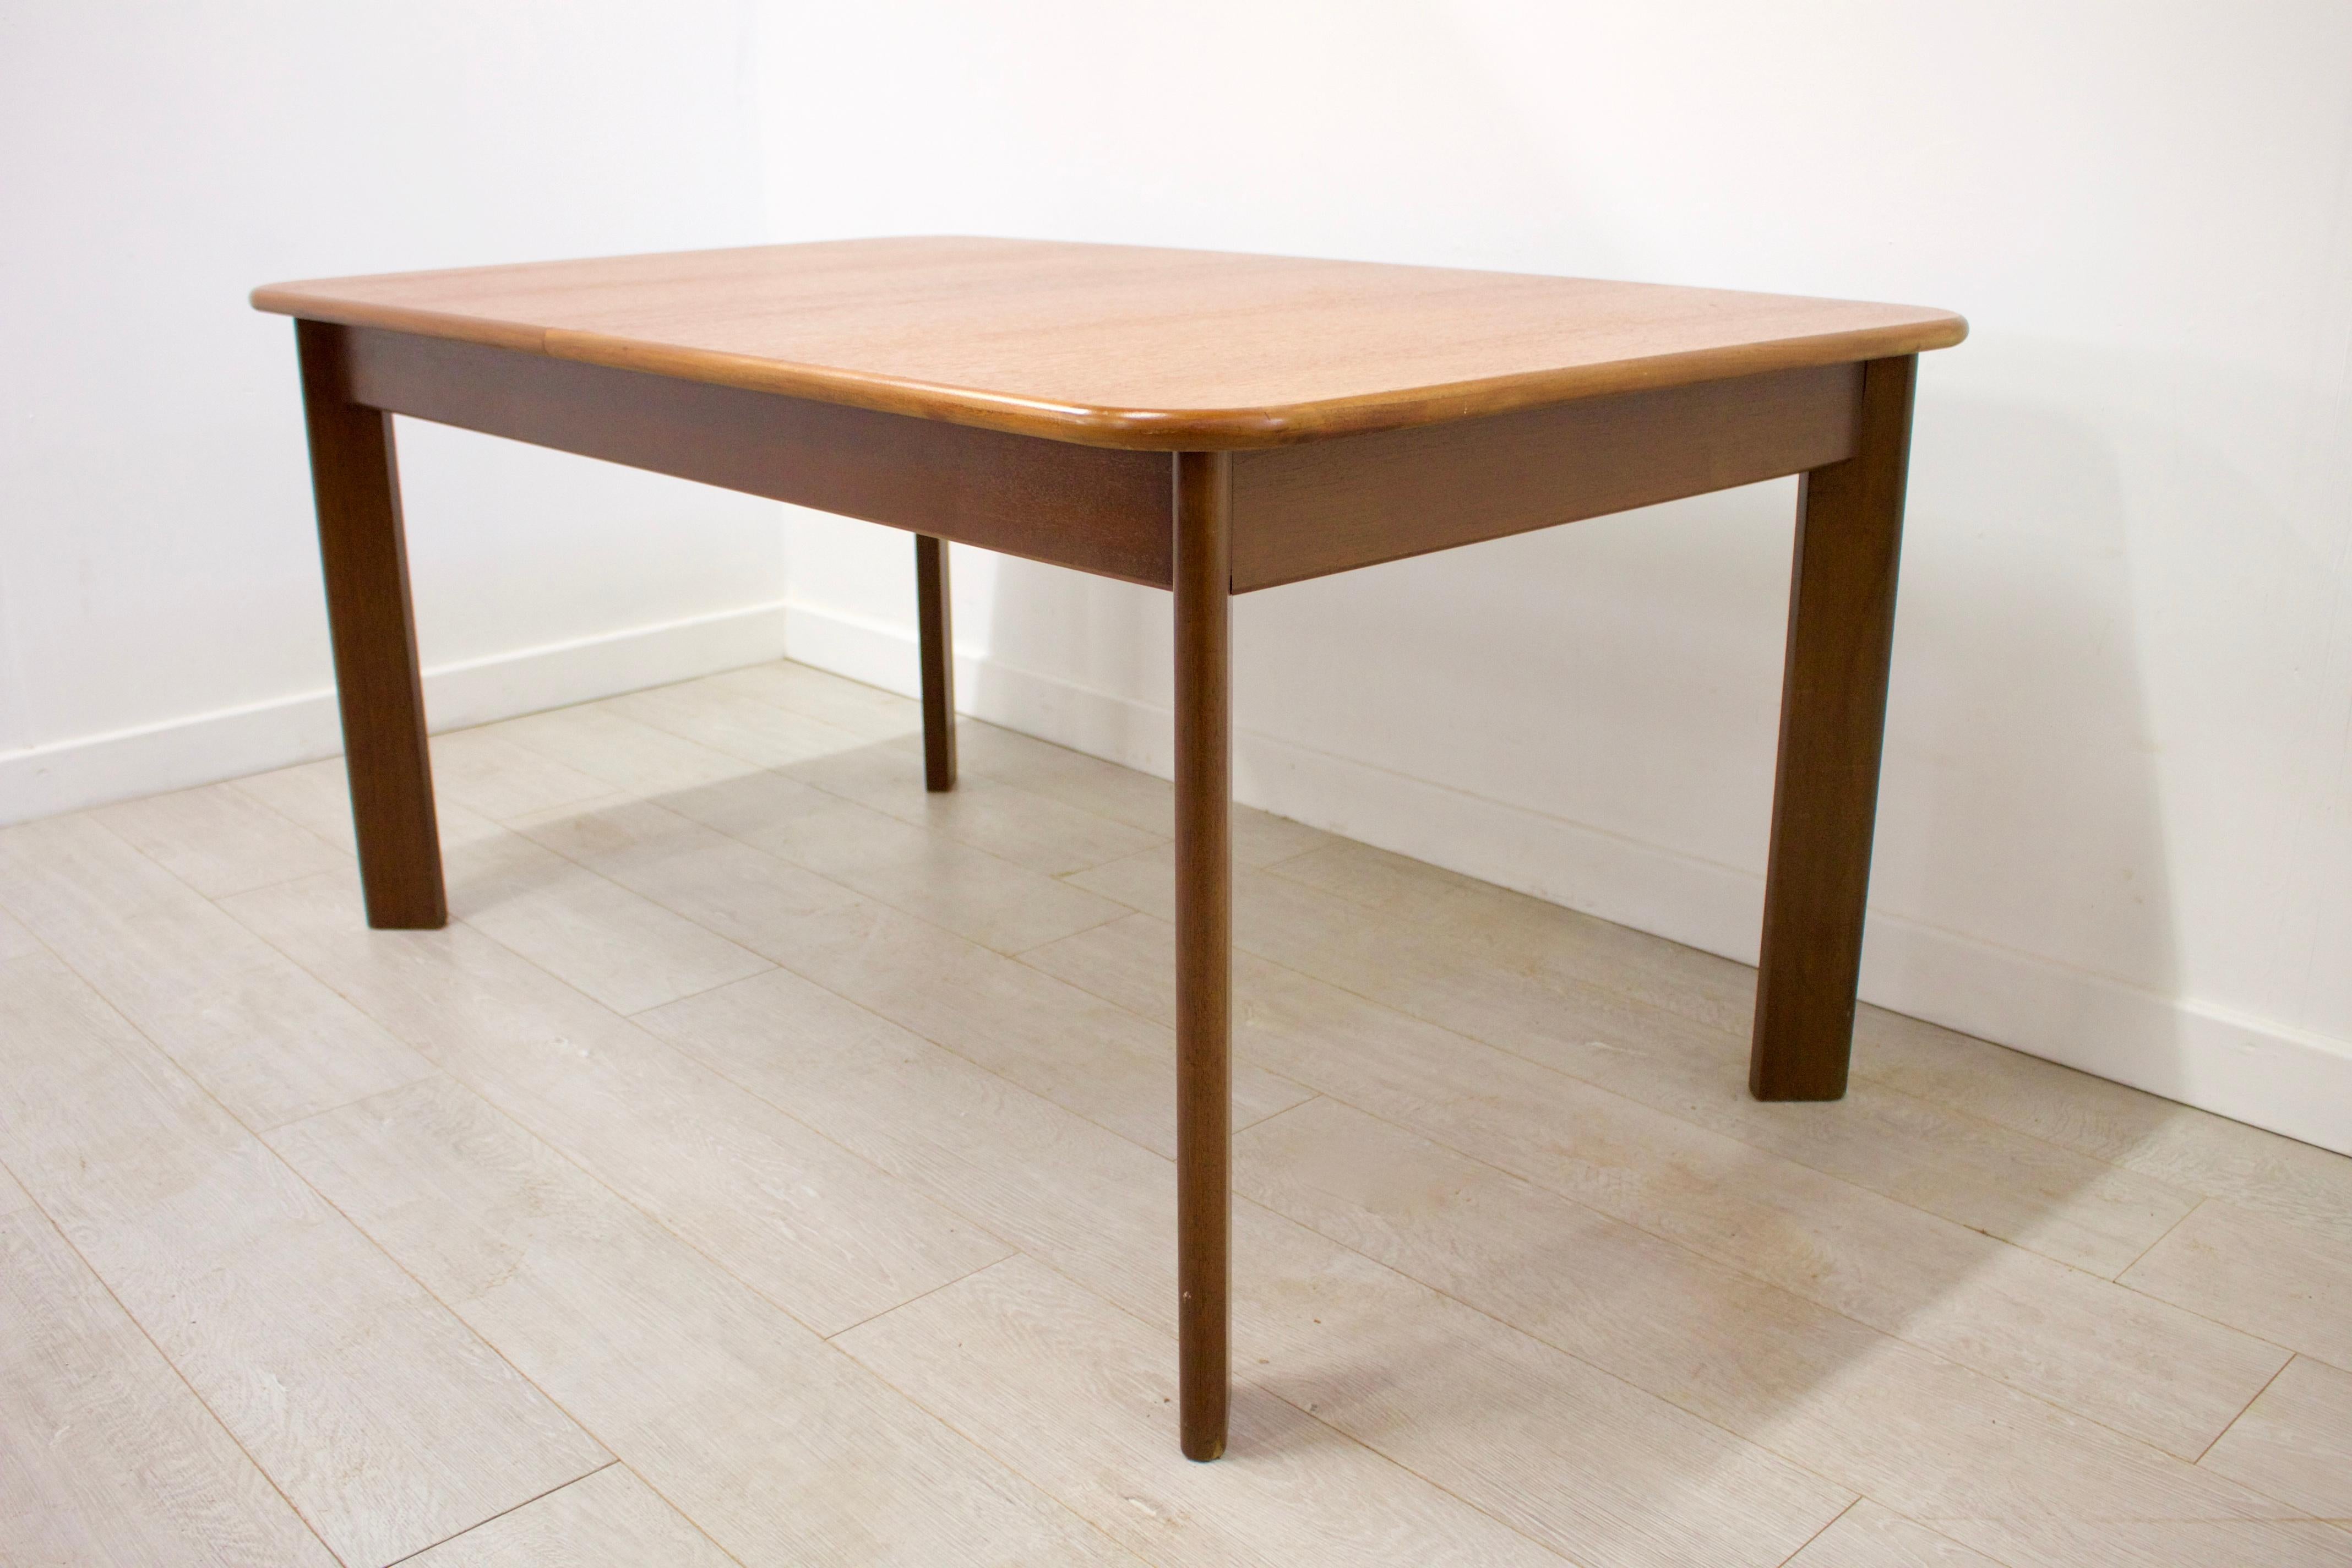 Midcentury Teak Extending Dining Table by G-Plan, 1970s For Sale 1